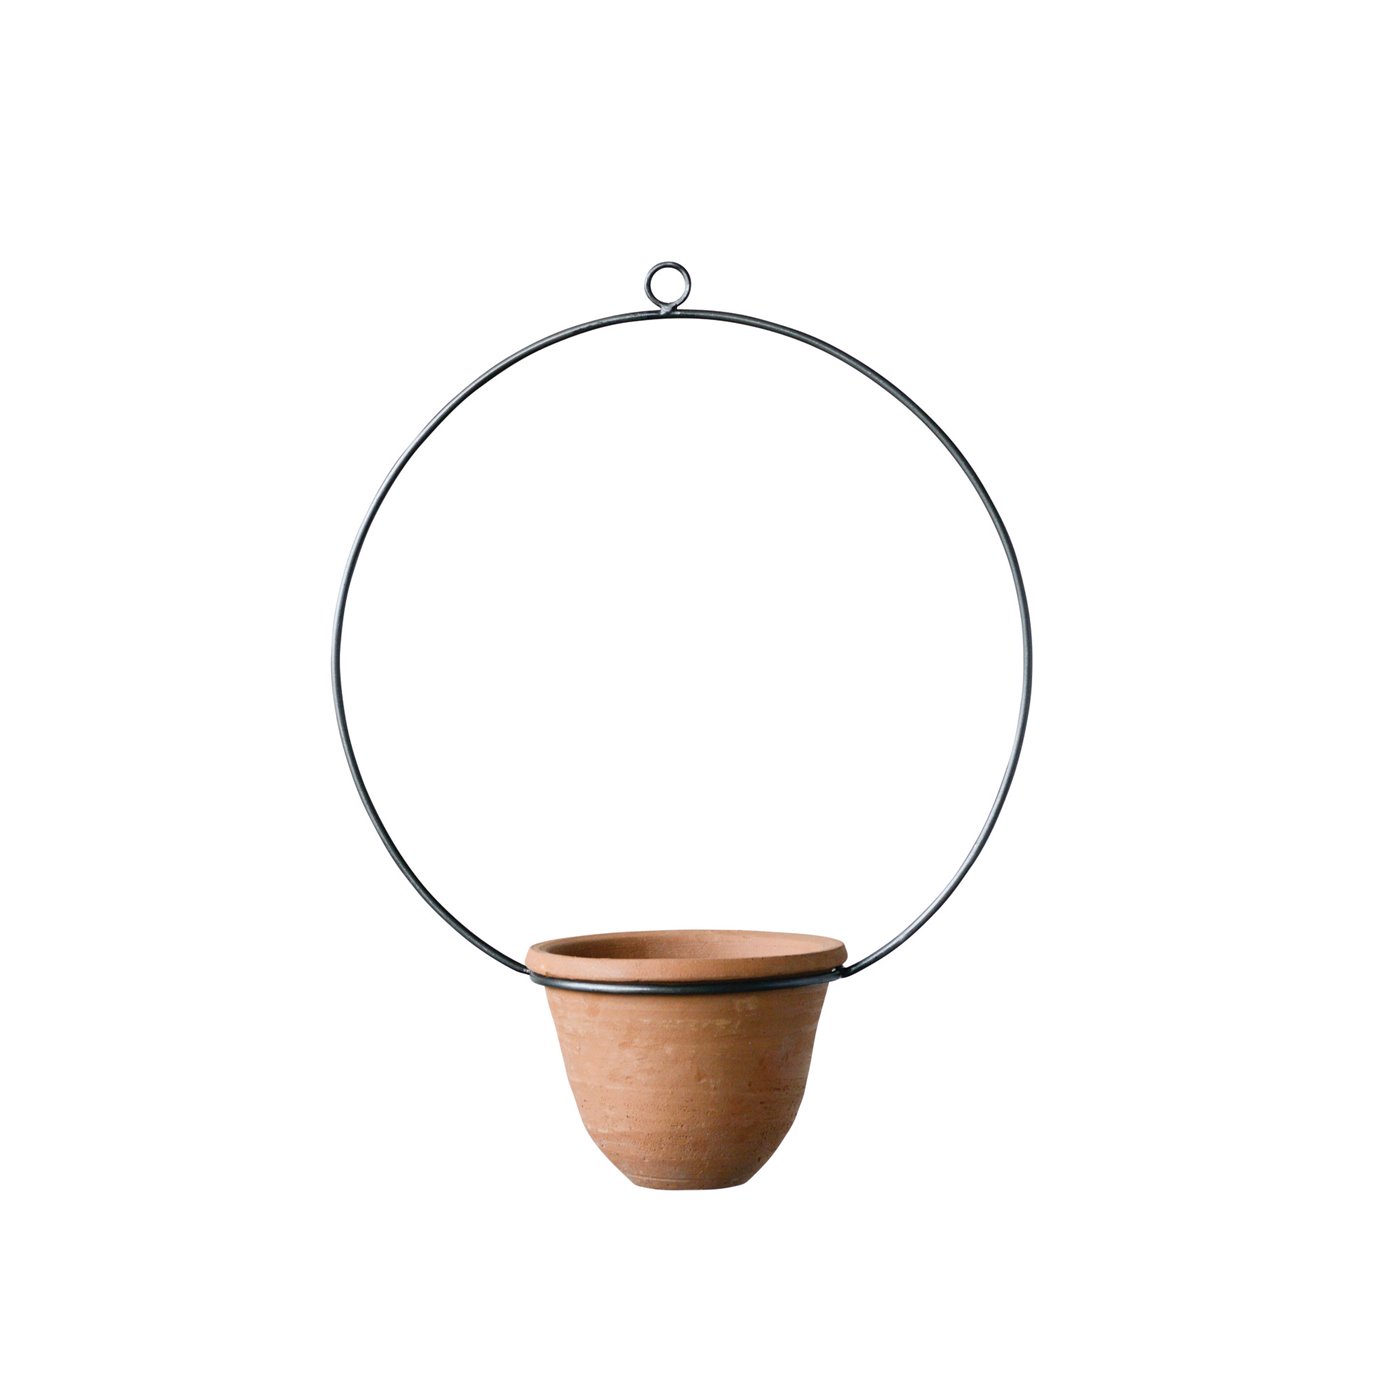 Hanging Terracotta Planter with Metal Hanger (Set of 2 Pieces)